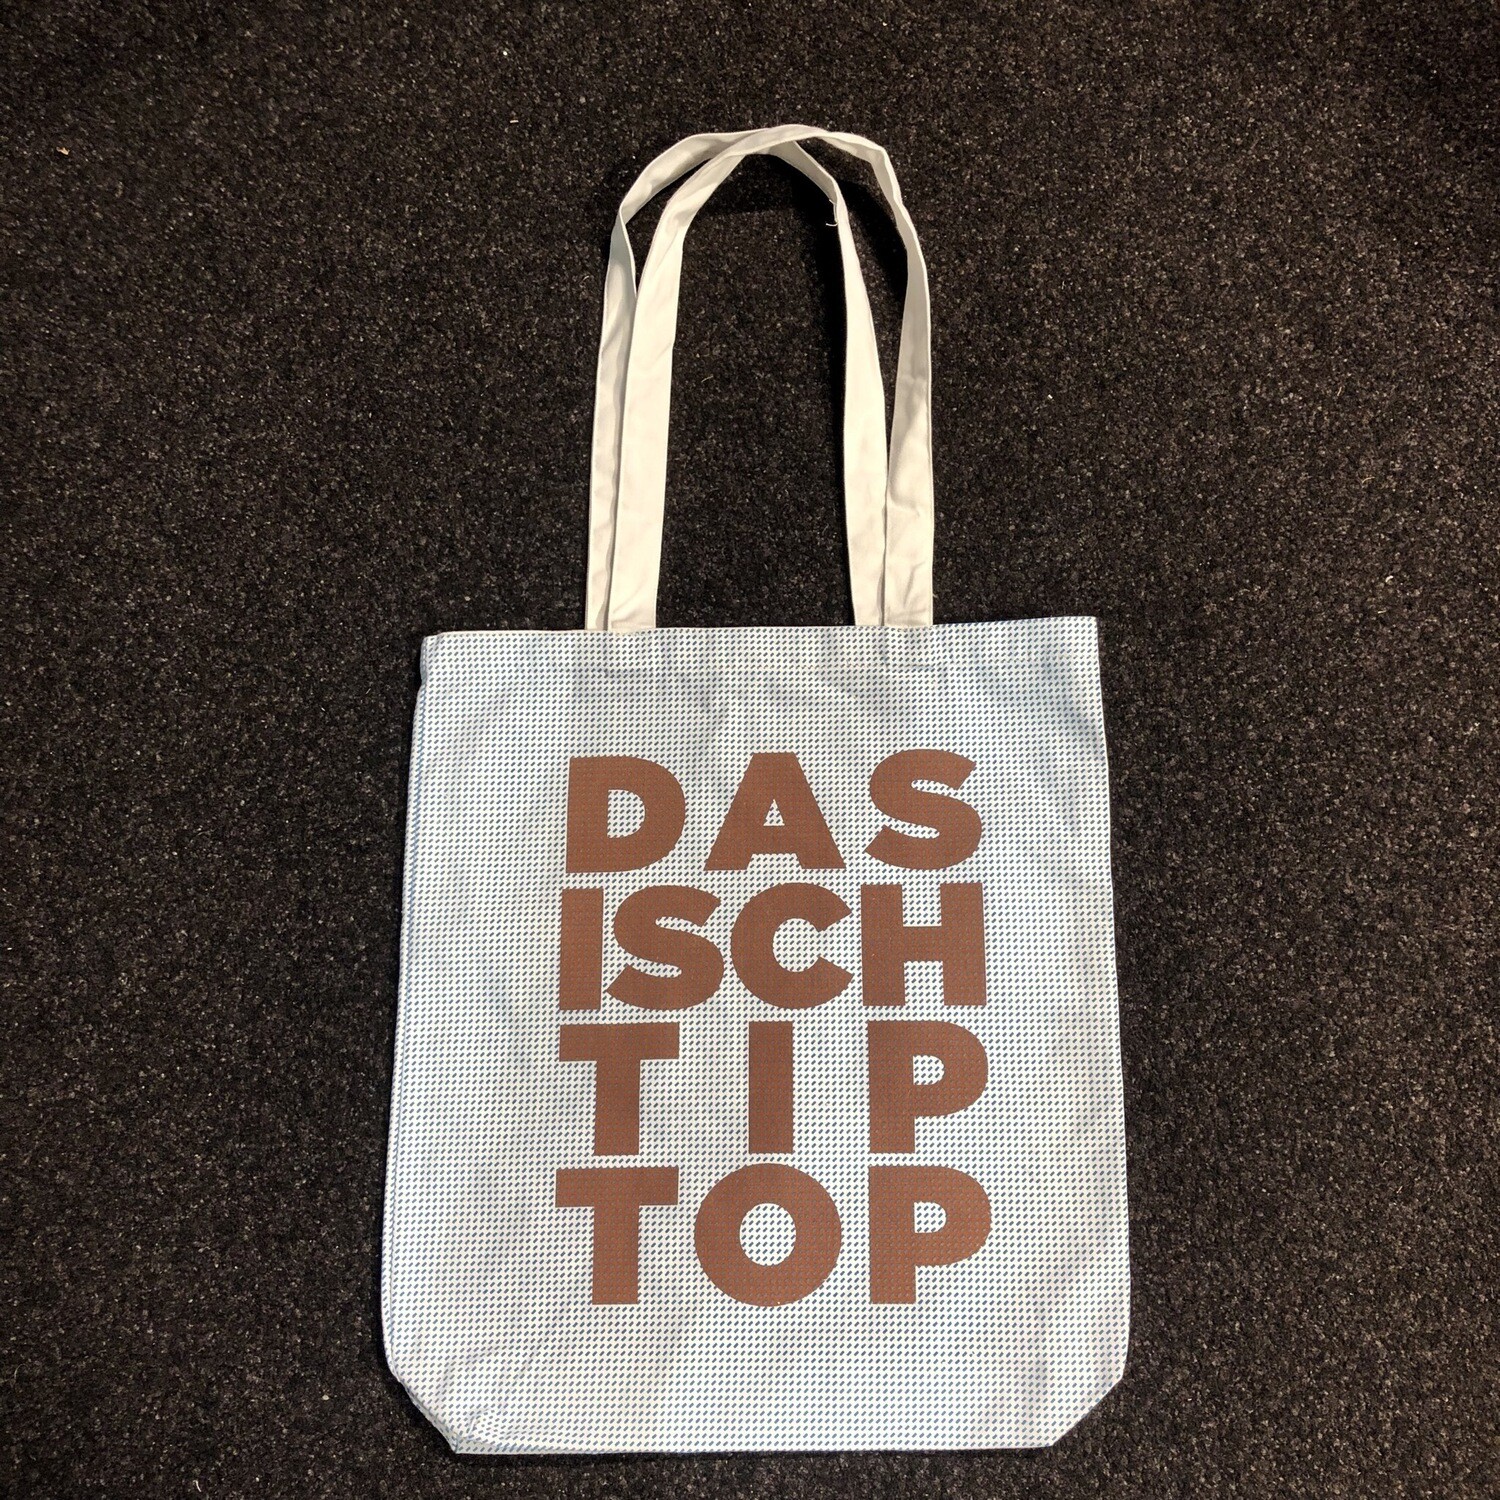 Tote bag Cully Cully  Das Isch tip-top